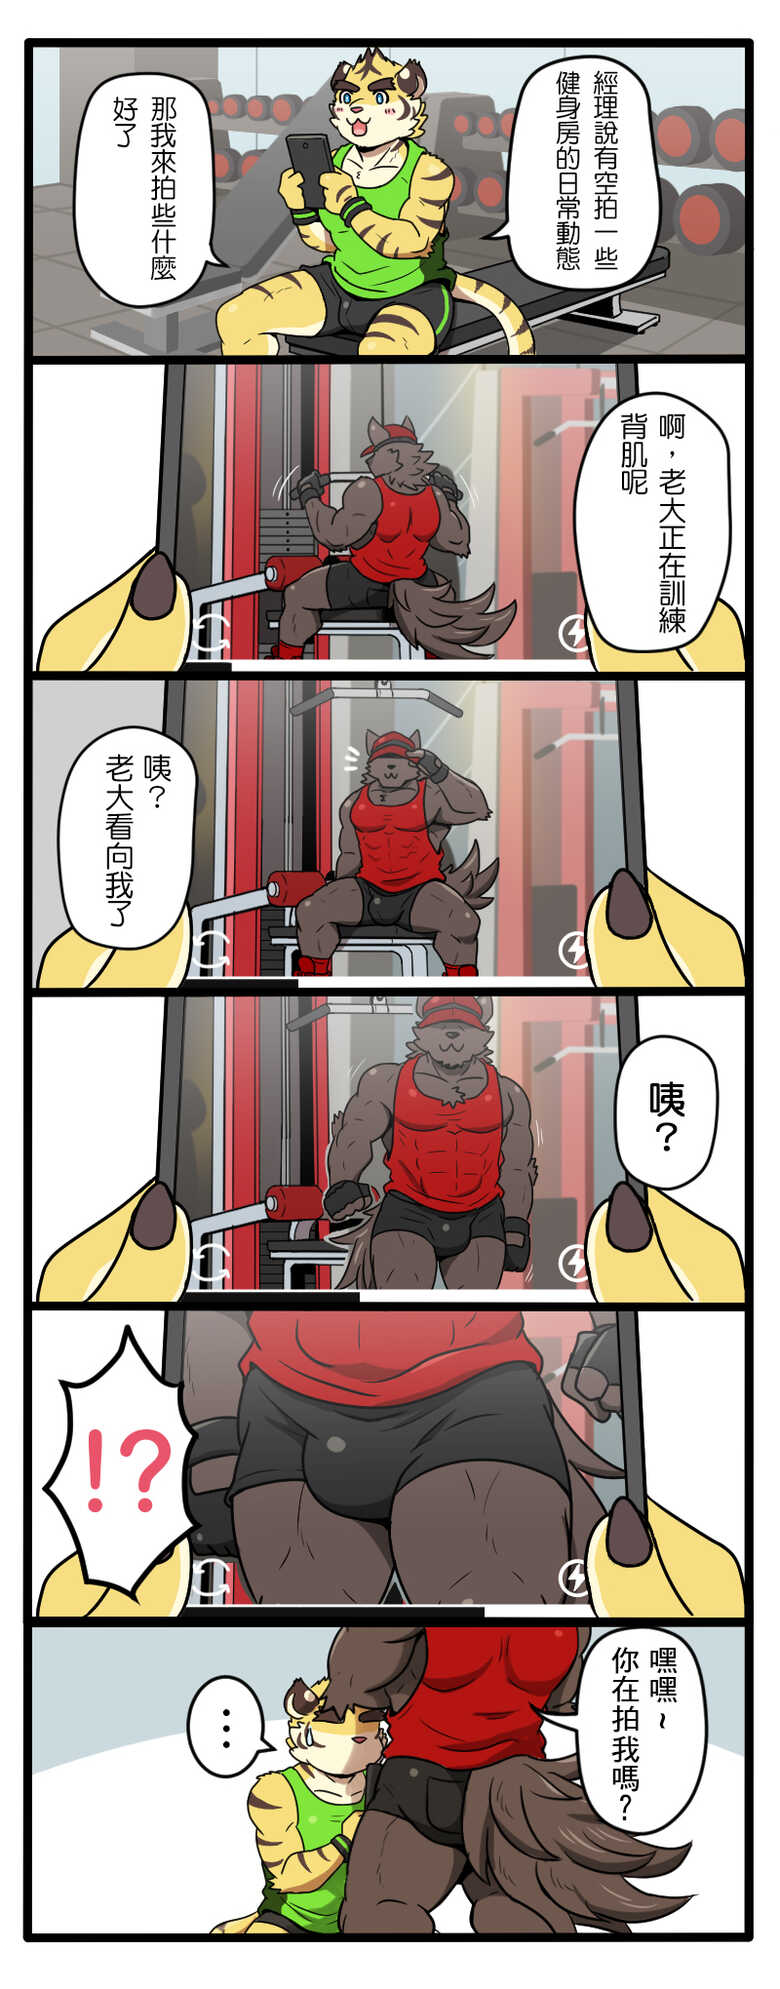 [Ripple Moon] Gym Pals (健身小哥) (Ongoing) [Chinese] [连载中] - Page 6